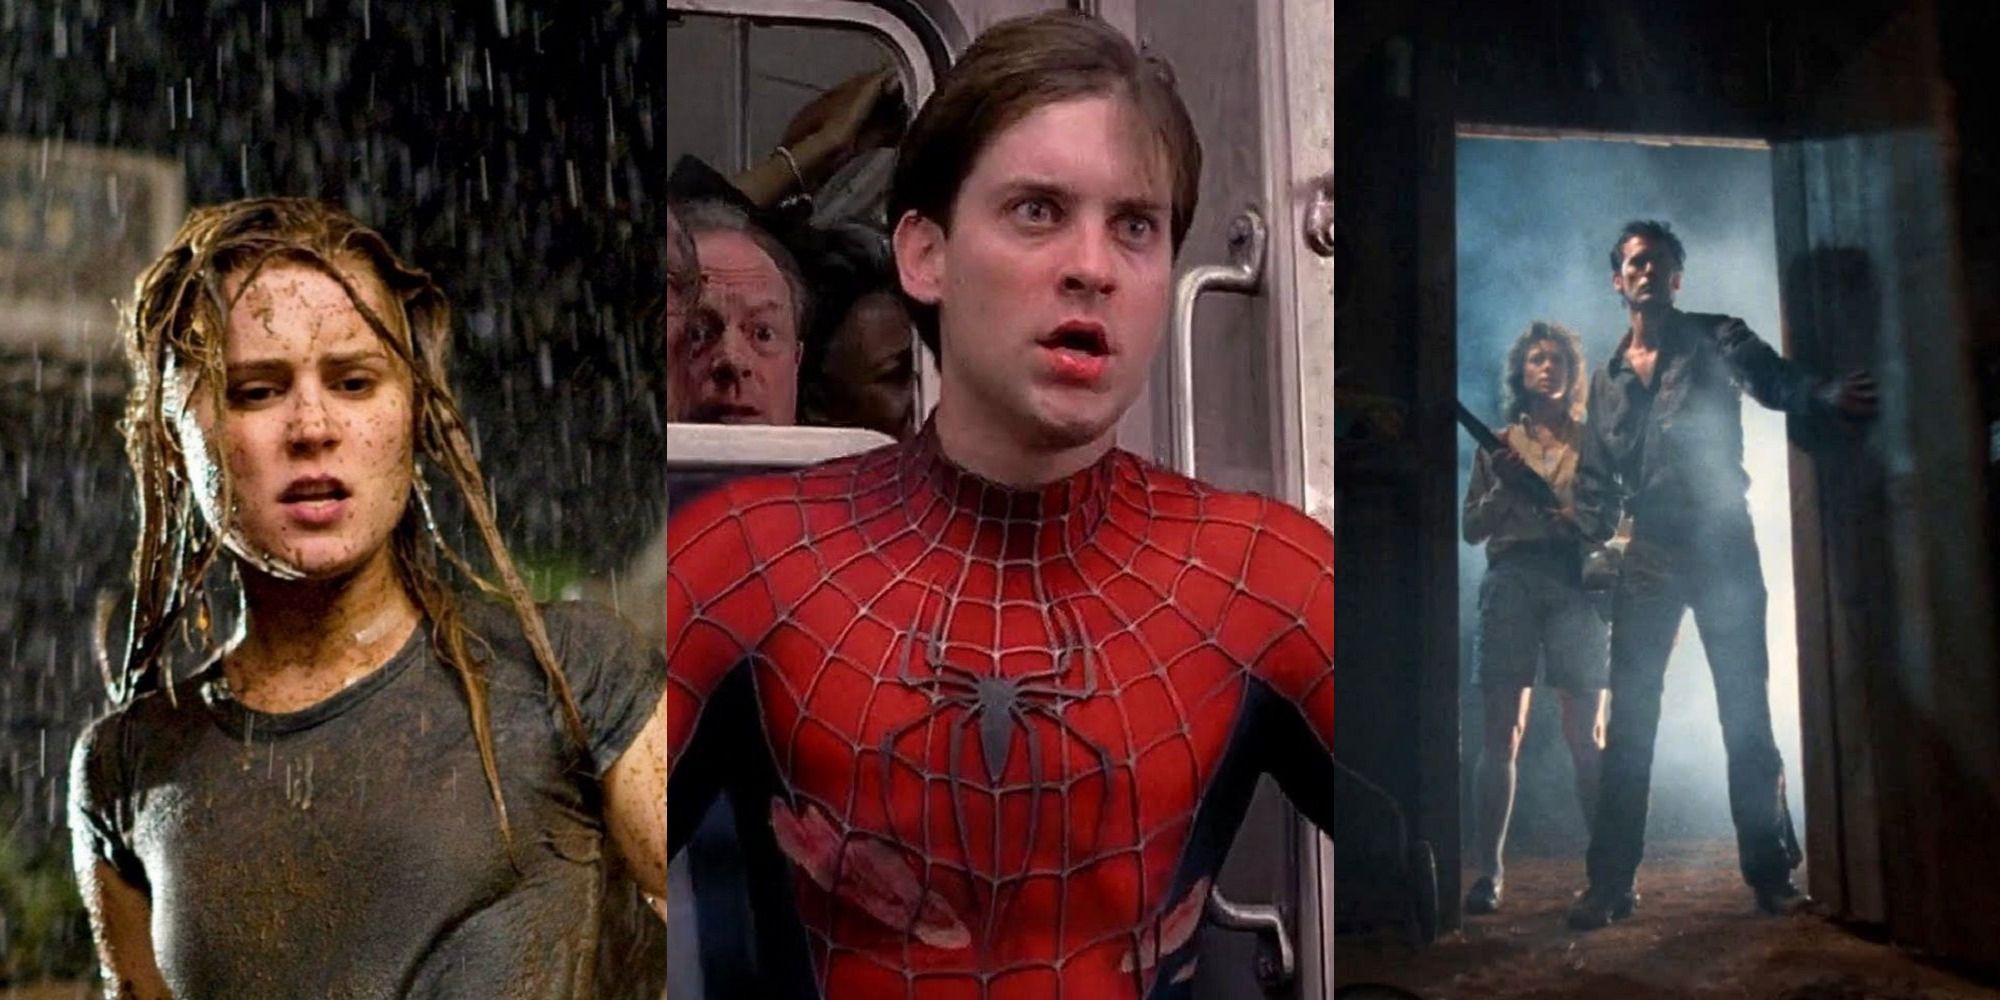 Drag Me to Hell, Spider-Man 2, Evil Dead II